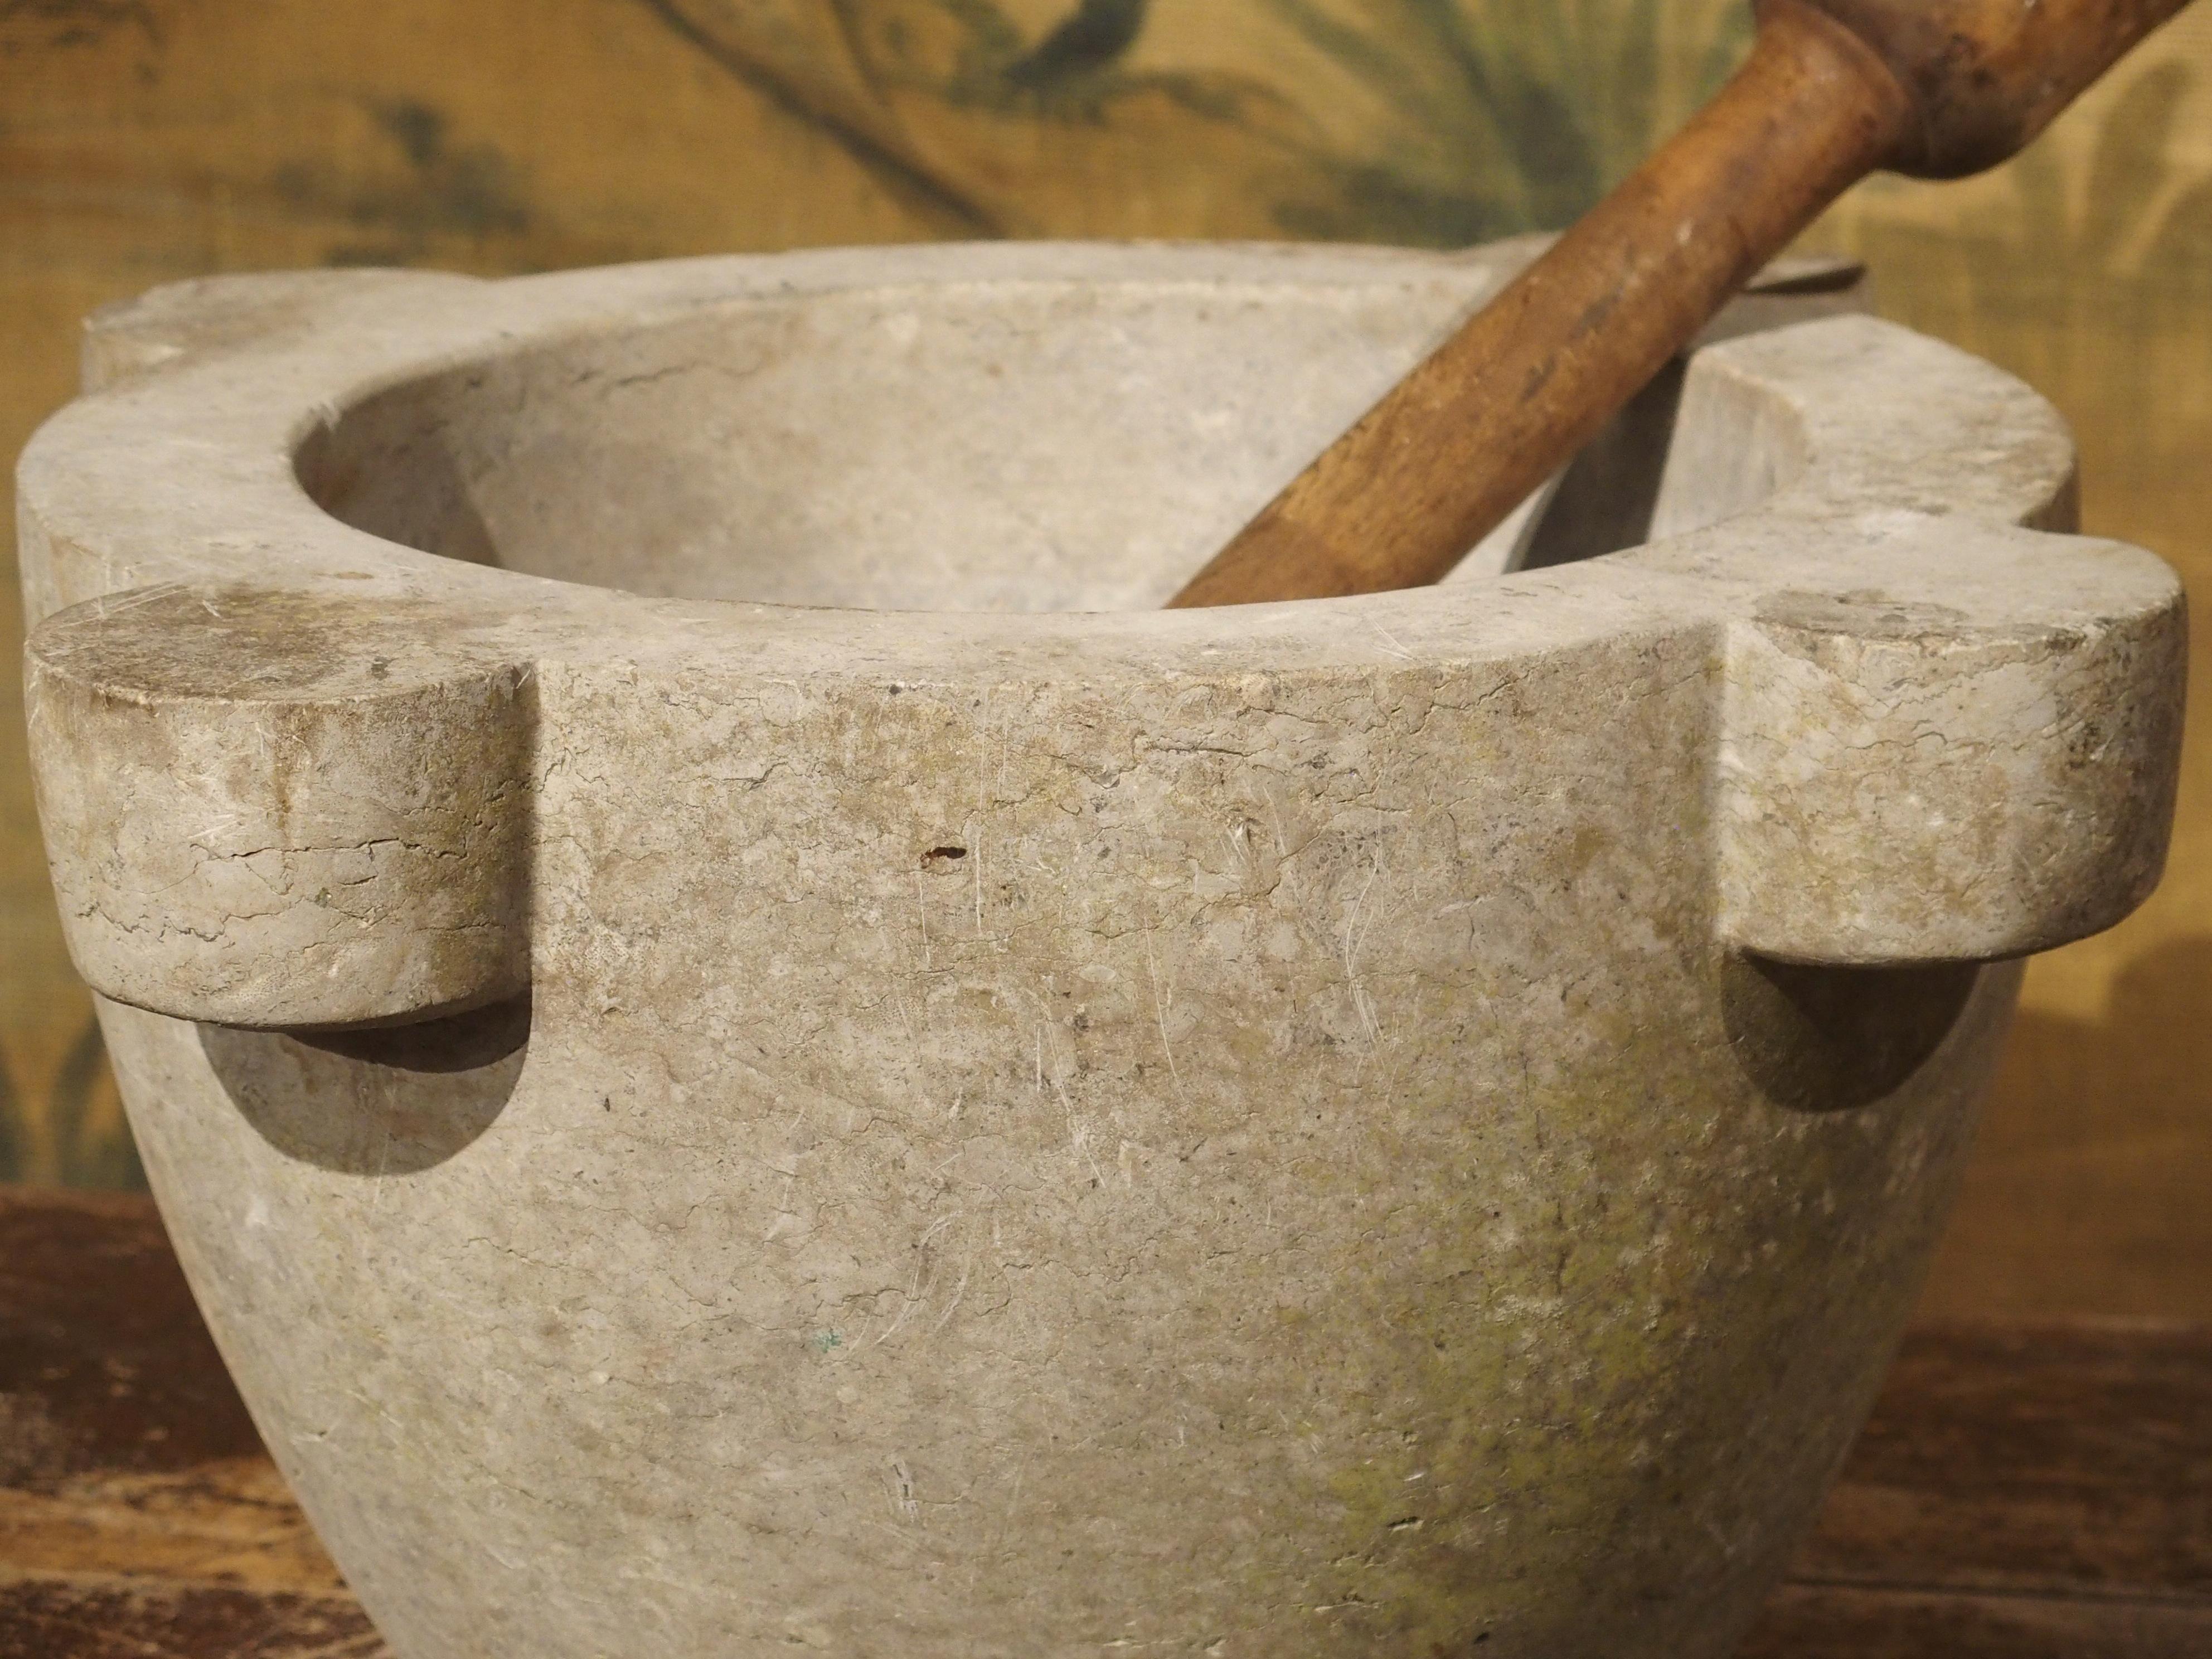 We have a wide range of assorted stone mortars and wooden pestles (one pestle is marble), from the collection of a former pharmacist in Rouen, France.

The original use of a mortar and pestle was to aid pharmacists in crushing herbs into powder